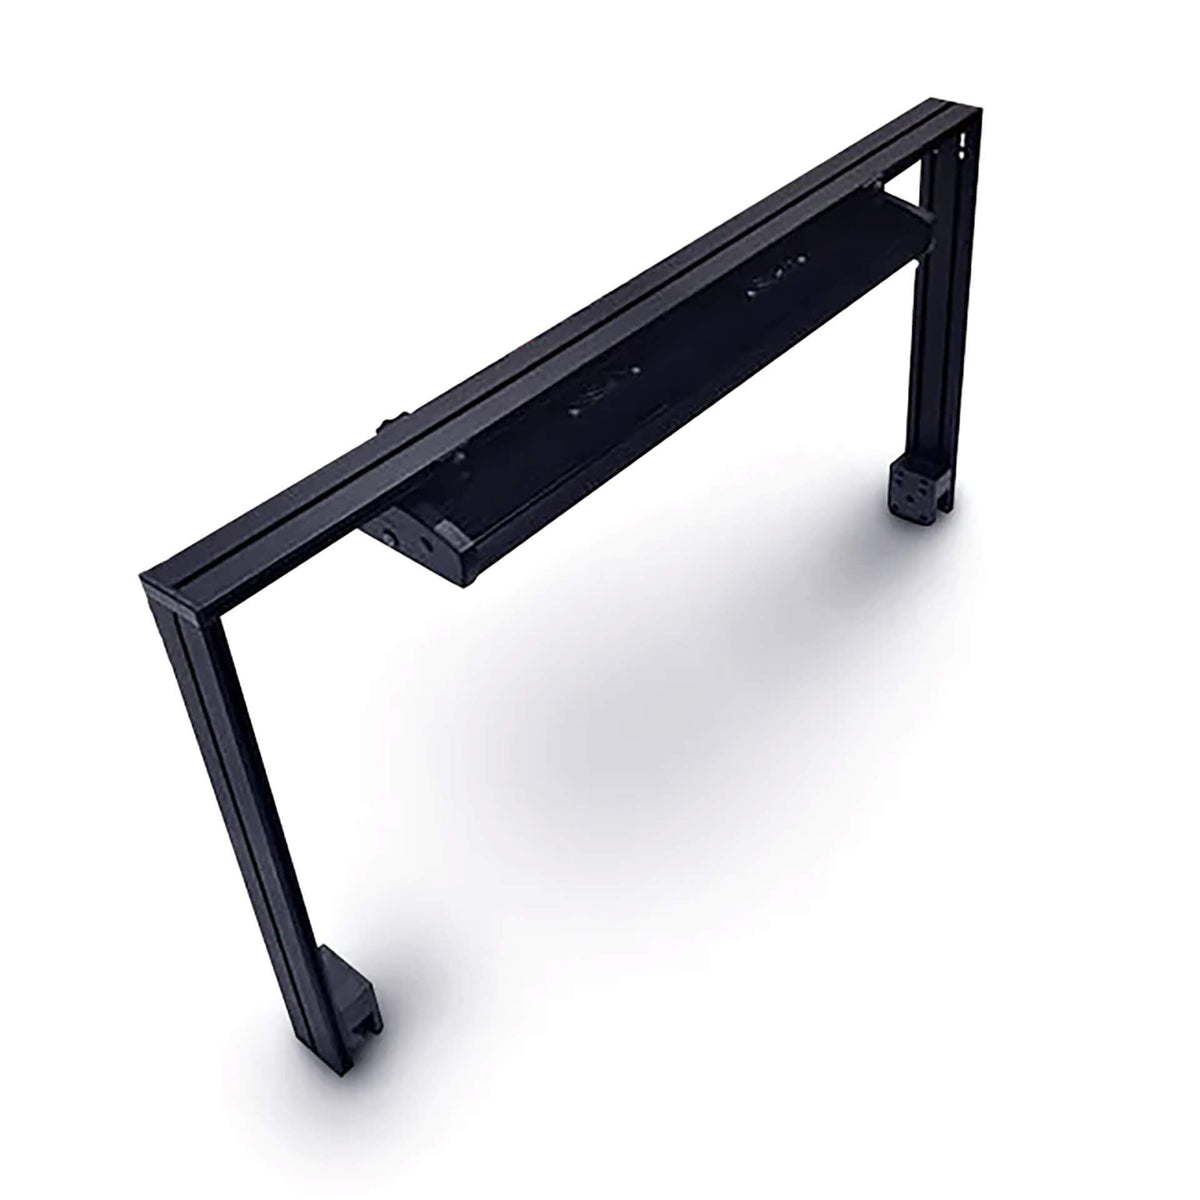 Illumagic 45cm Rail Only Mounting System - Special Order Item